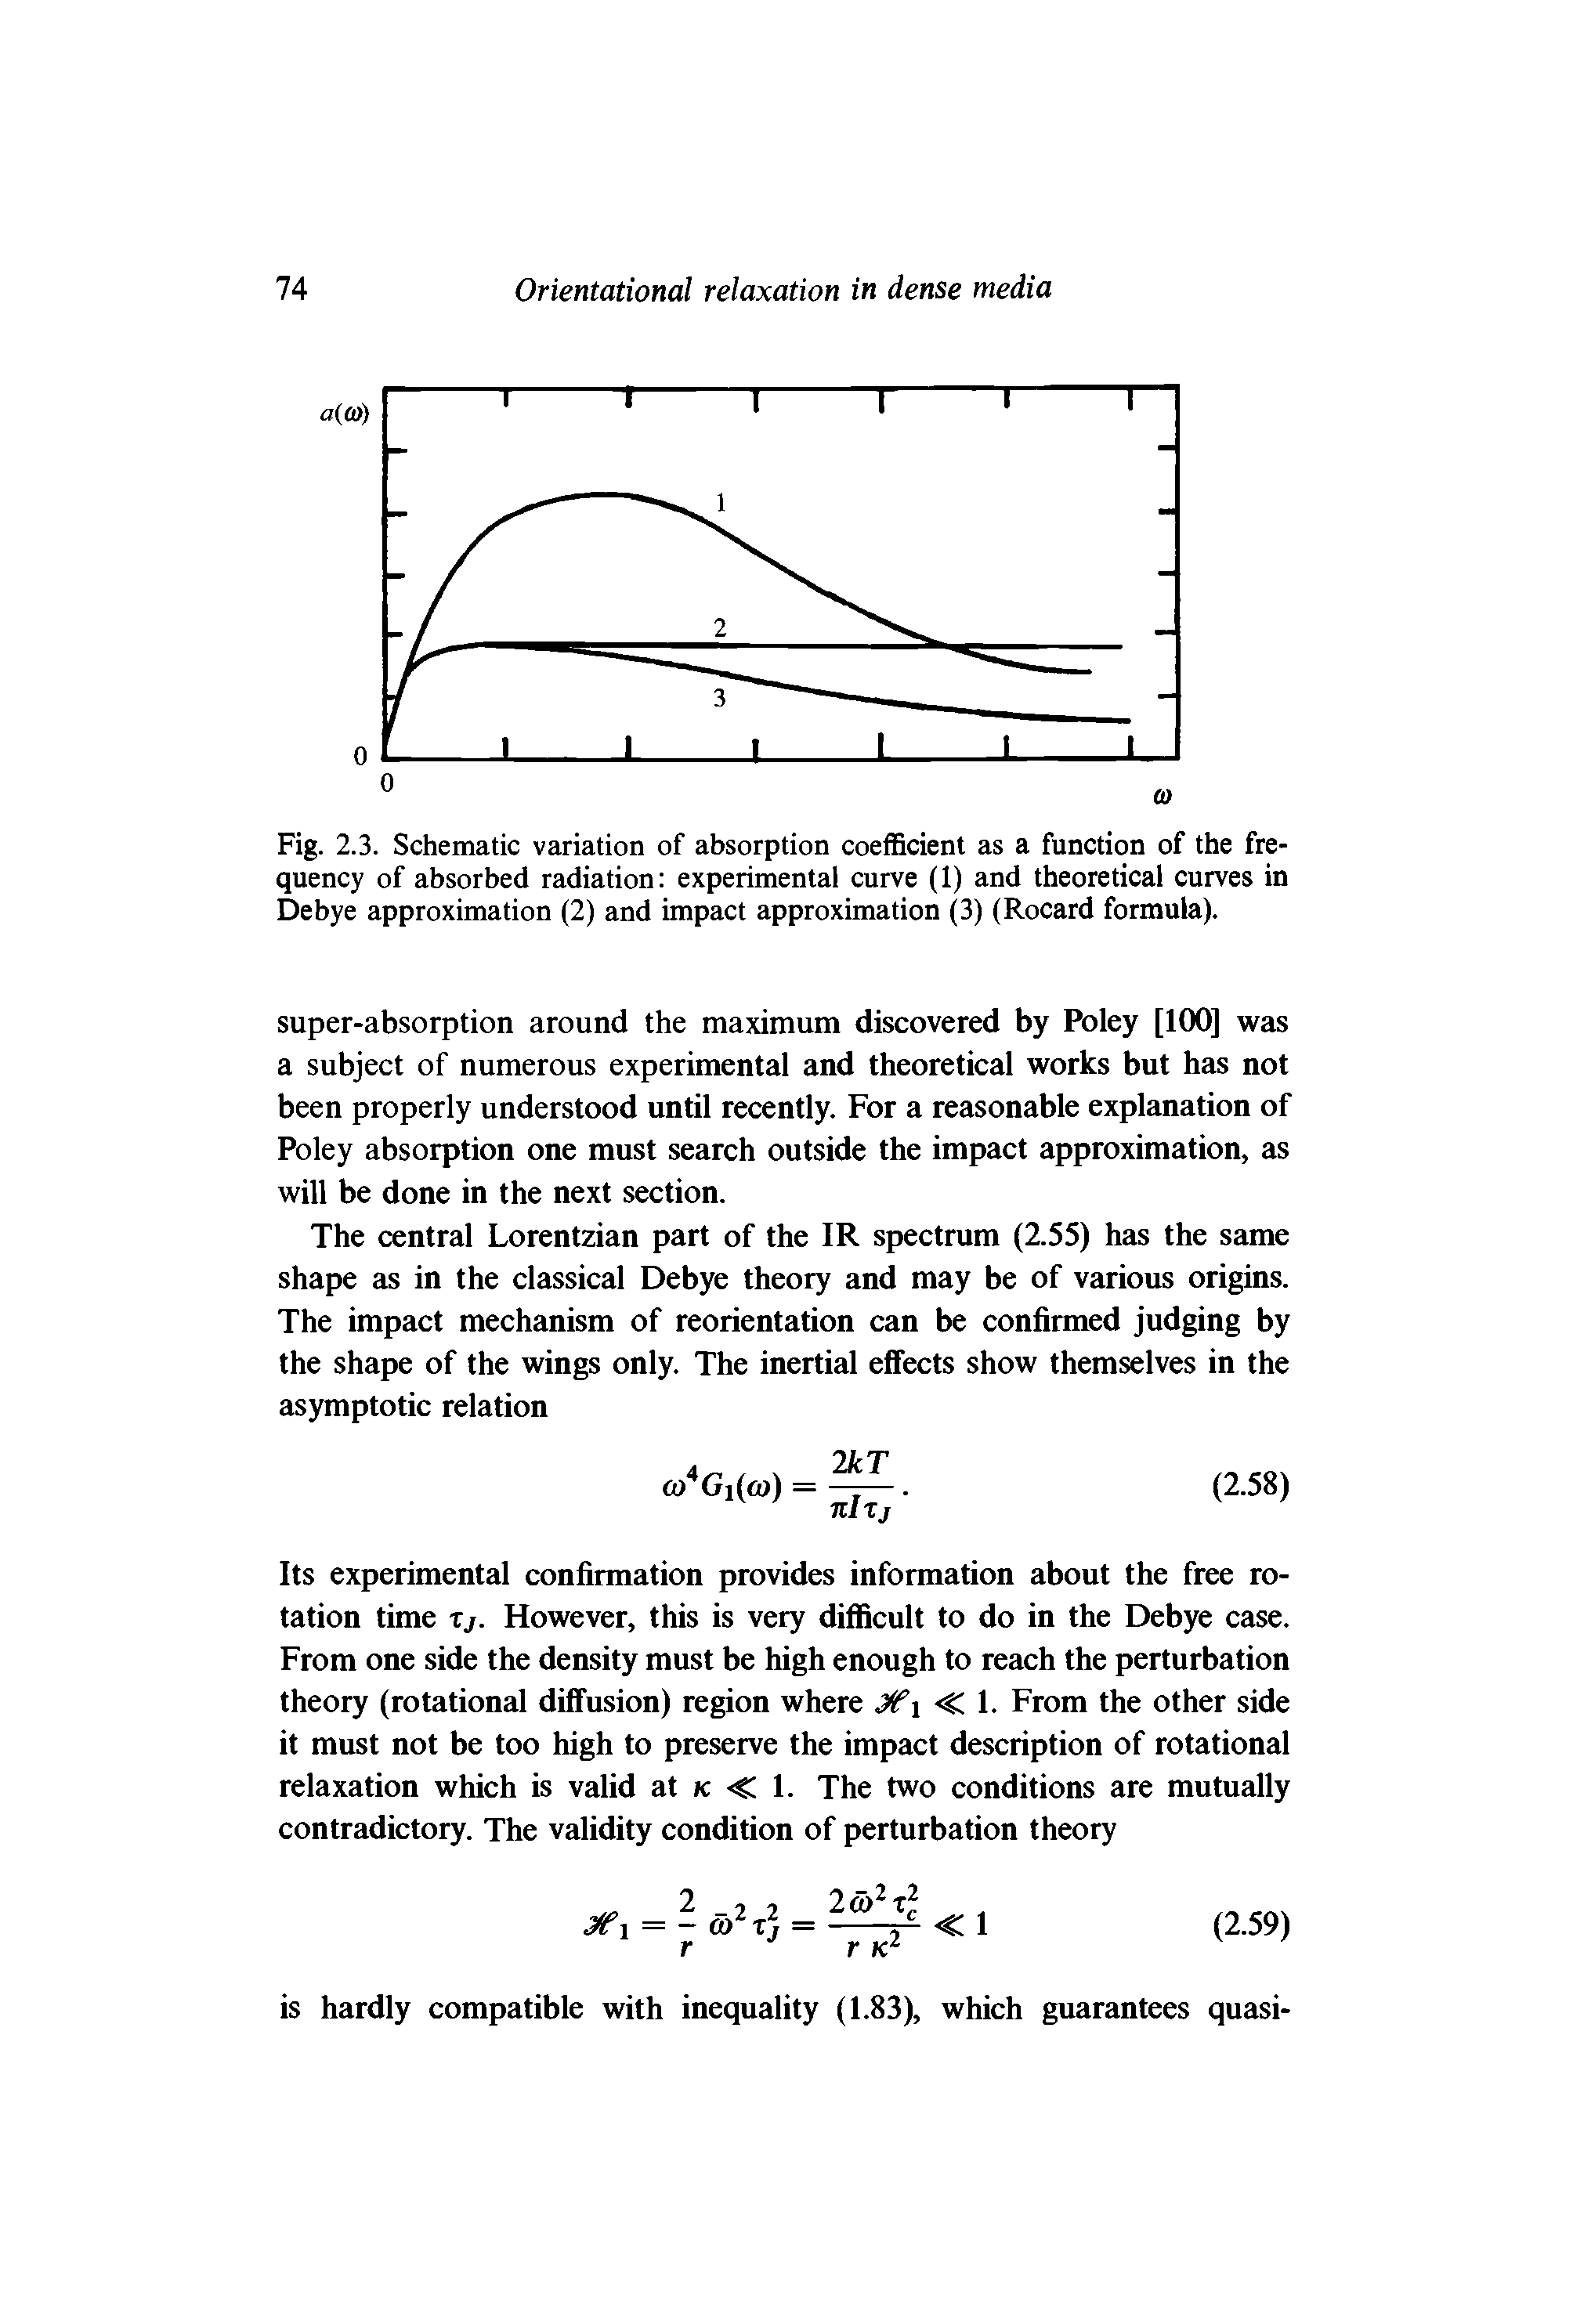 Fig. 2.3. Schematic variation of absorption coefficient as a function of the frequency of absorbed radiation experimental curve (1) and theoretical curves in Debye approximation (2) and impact approximation (3) (Rocard formula).